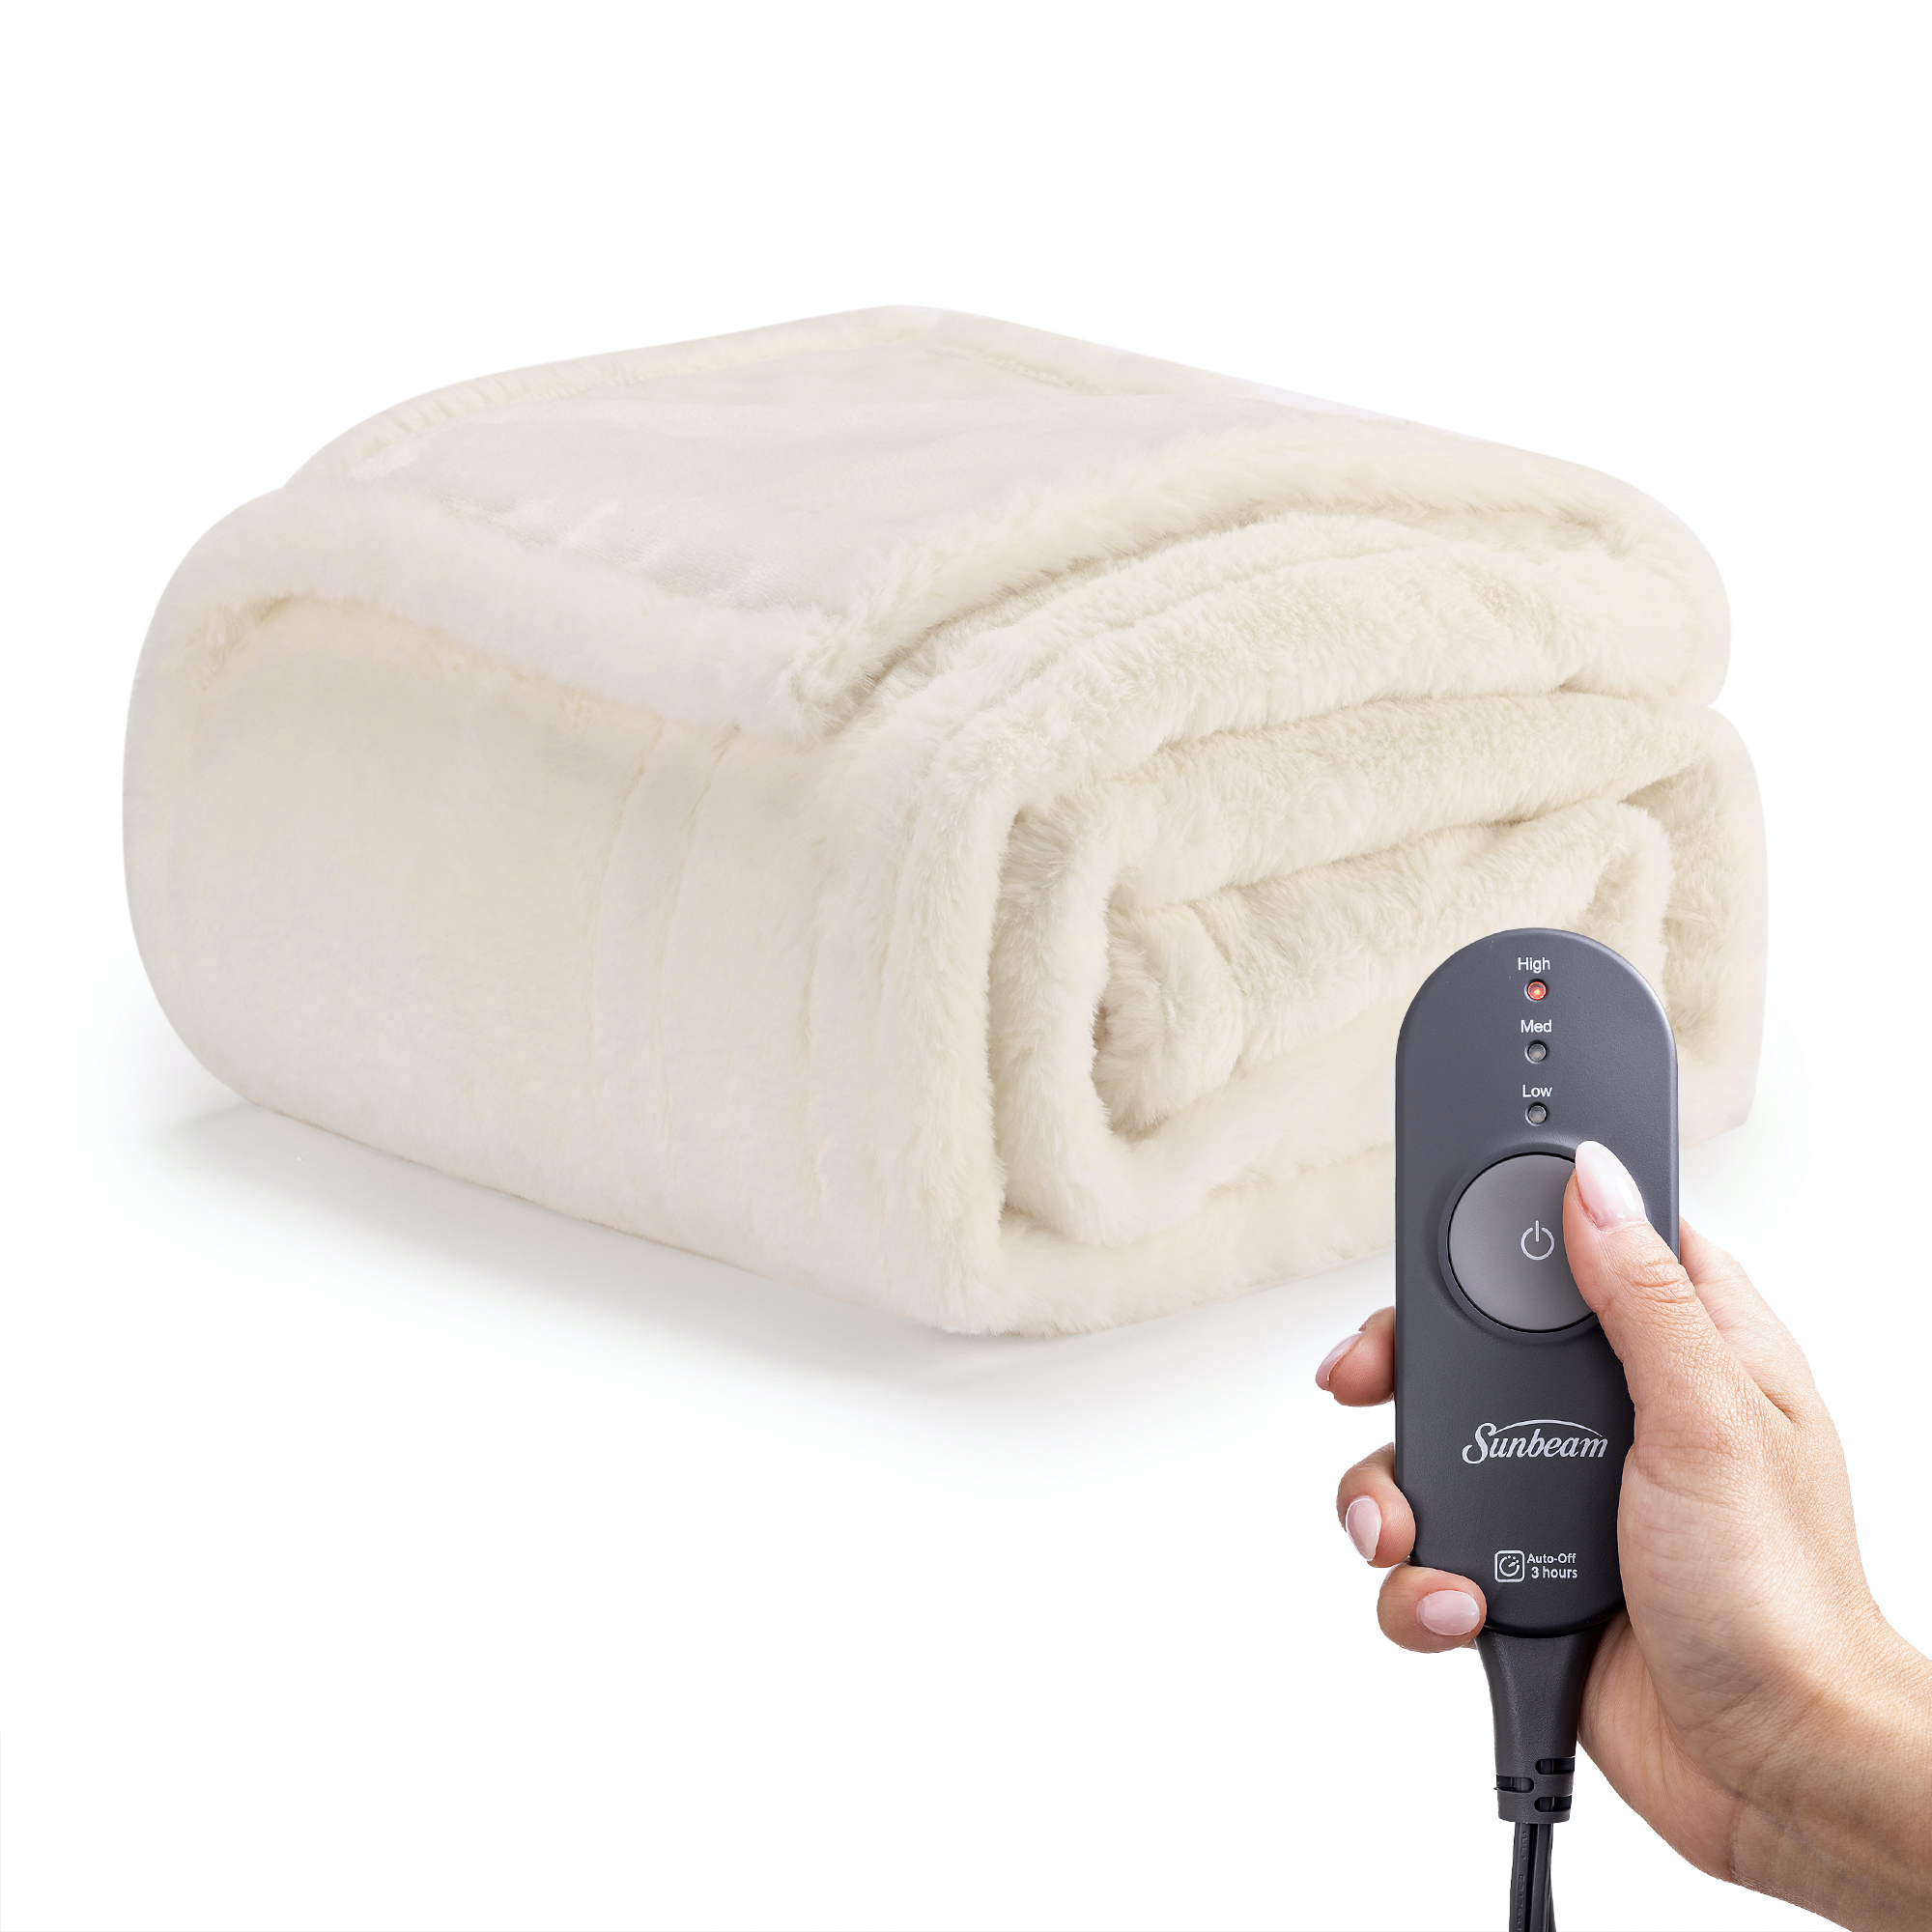 Sunbeam White Faux Fur Heated Electric Throw - image 1 of 8